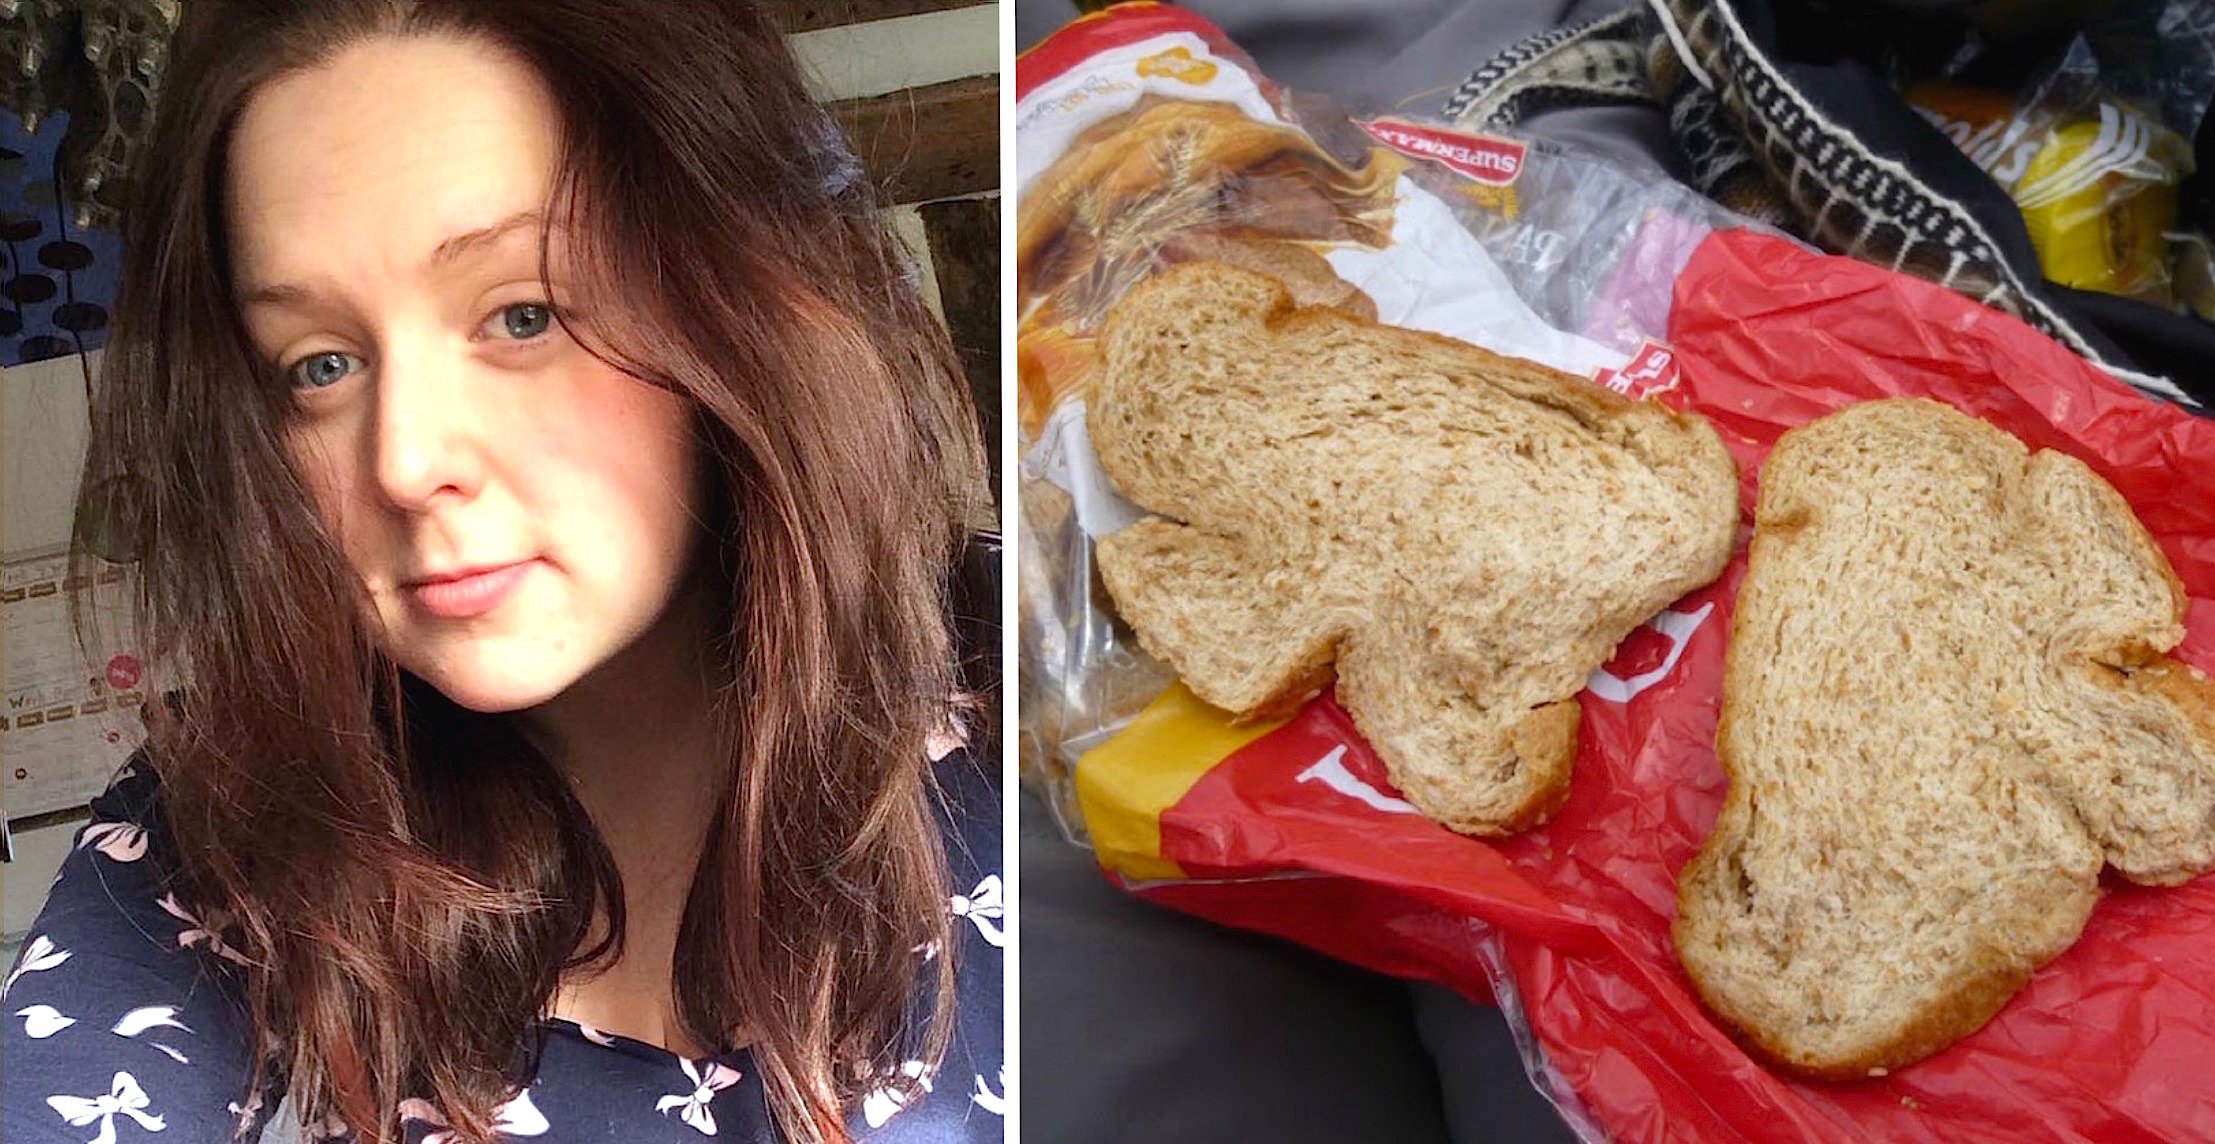 bread.jpg?resize=1200,630 - Tesco Shopper Writes About Her Experience With An Autistic Cashier.. HEARTWARMING!